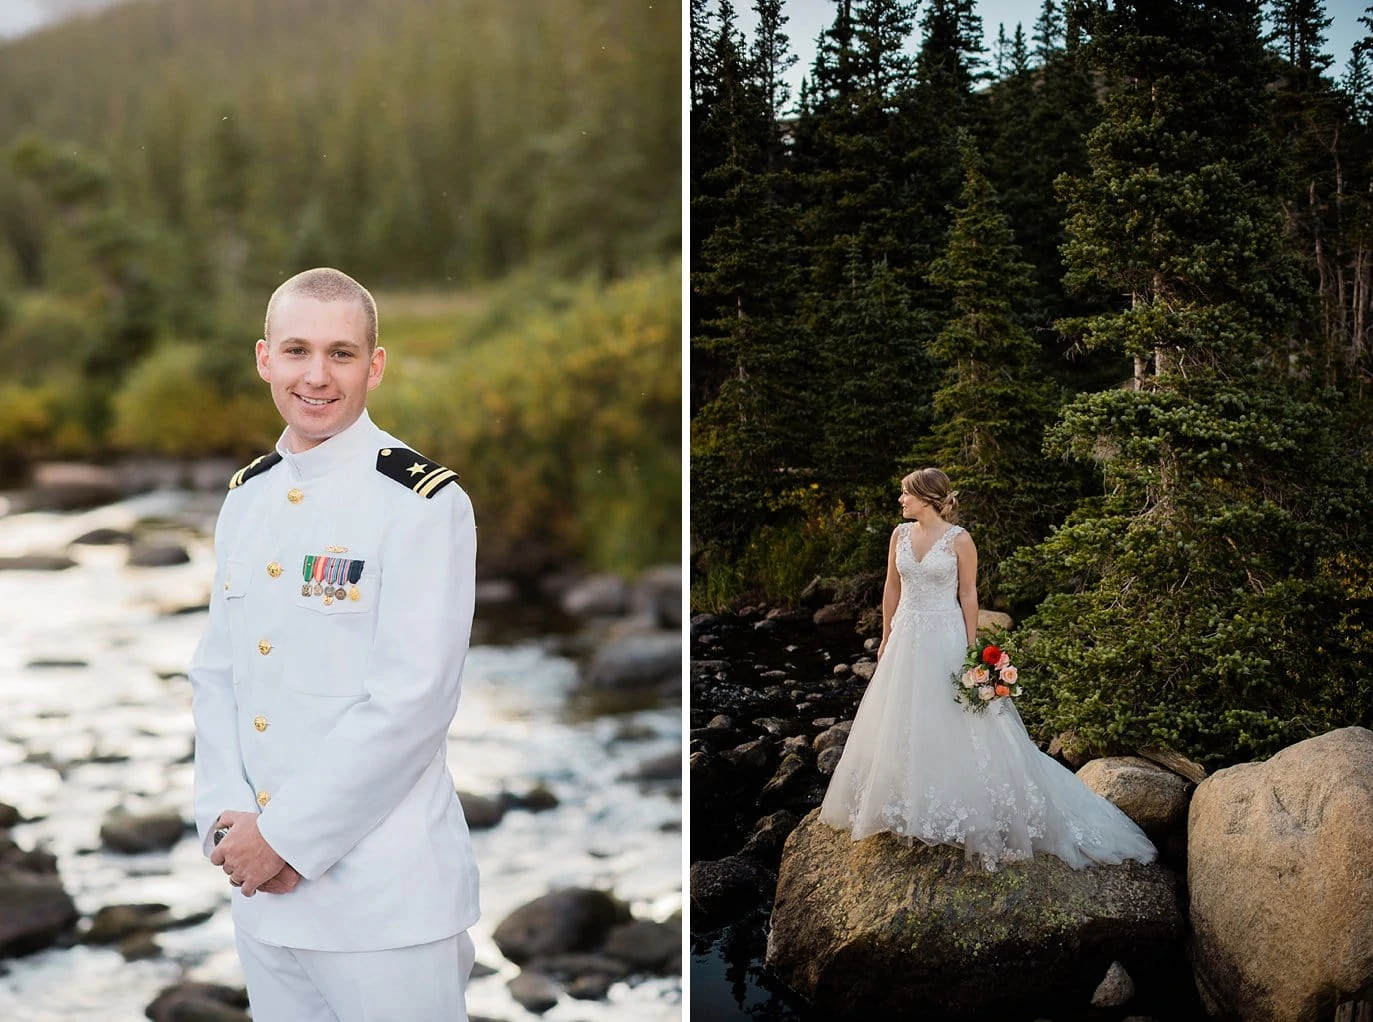 bride in ballgown by creek at Long Lake and groom in Marine white uniform